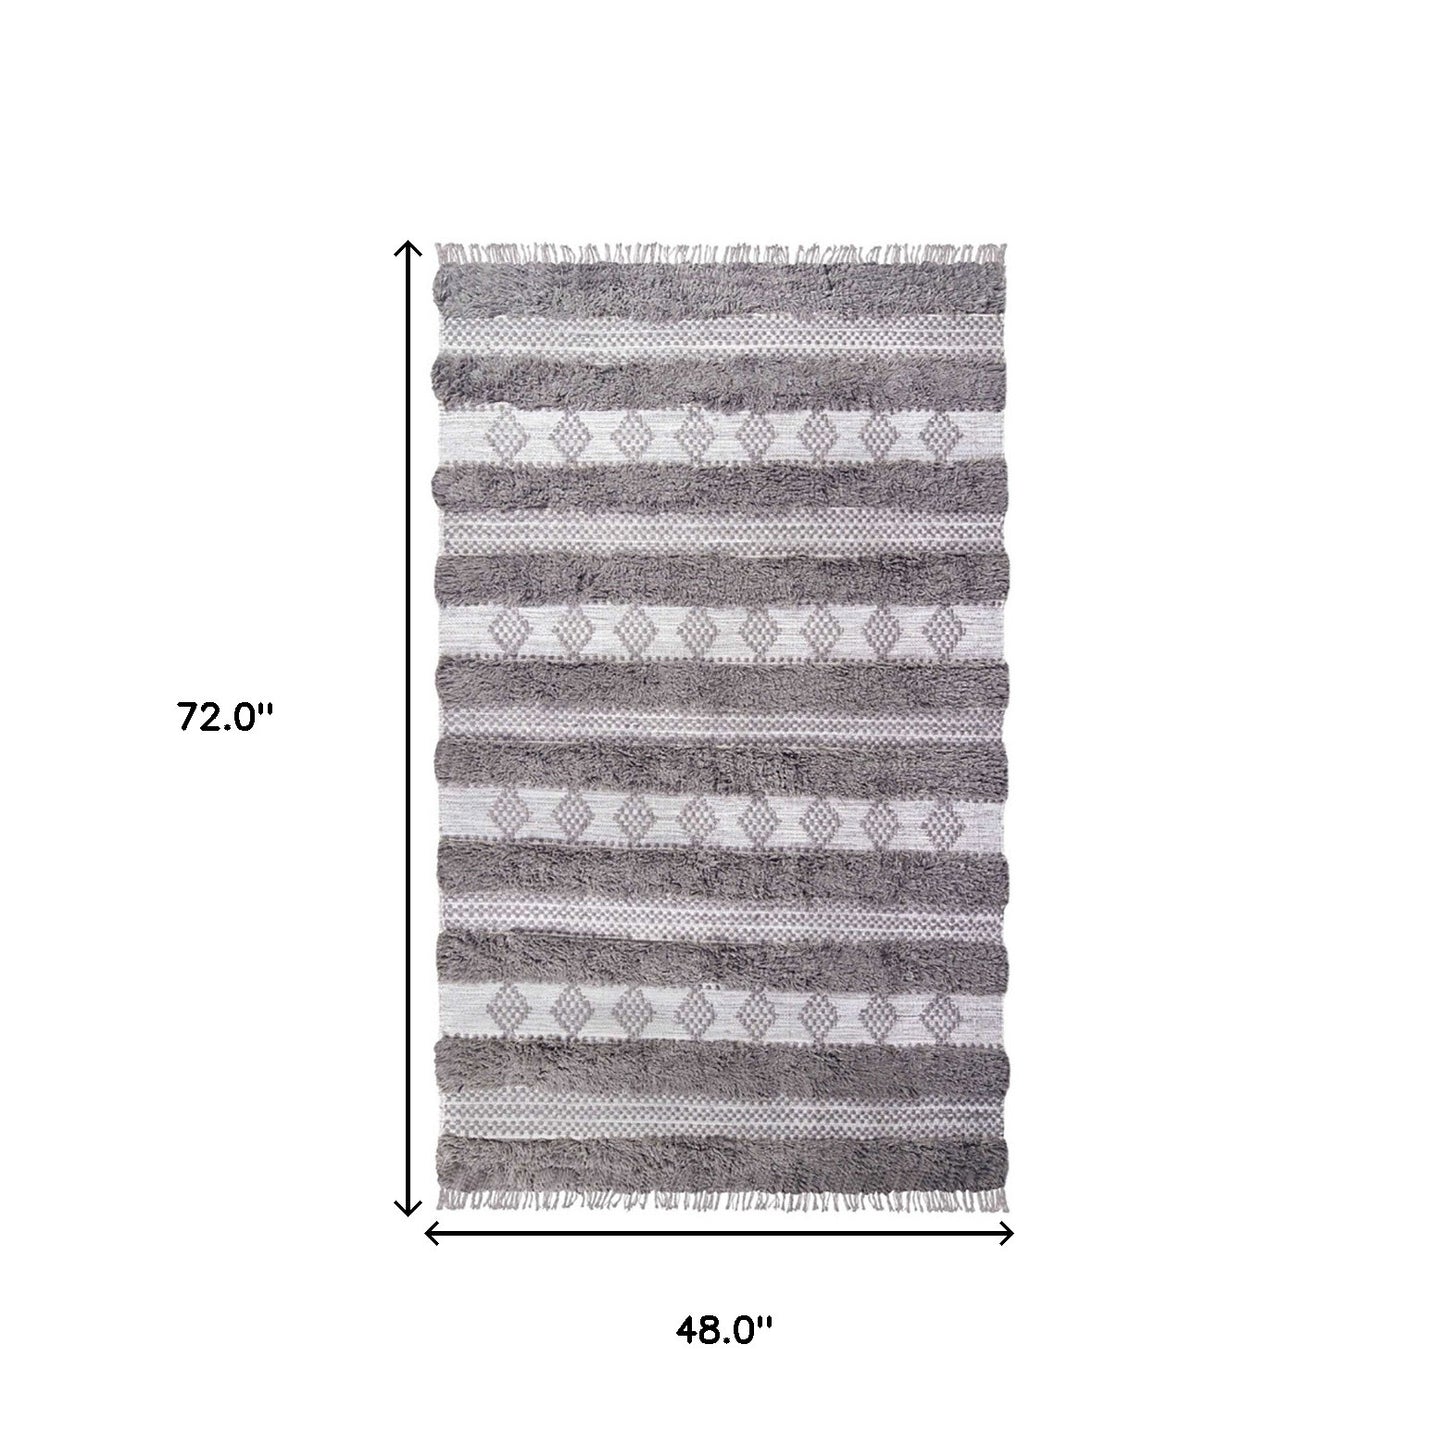 4' X 6' Grey And Silver Wool Striped Flatweave Handmade Stain Resistant Area Rug With Fringe